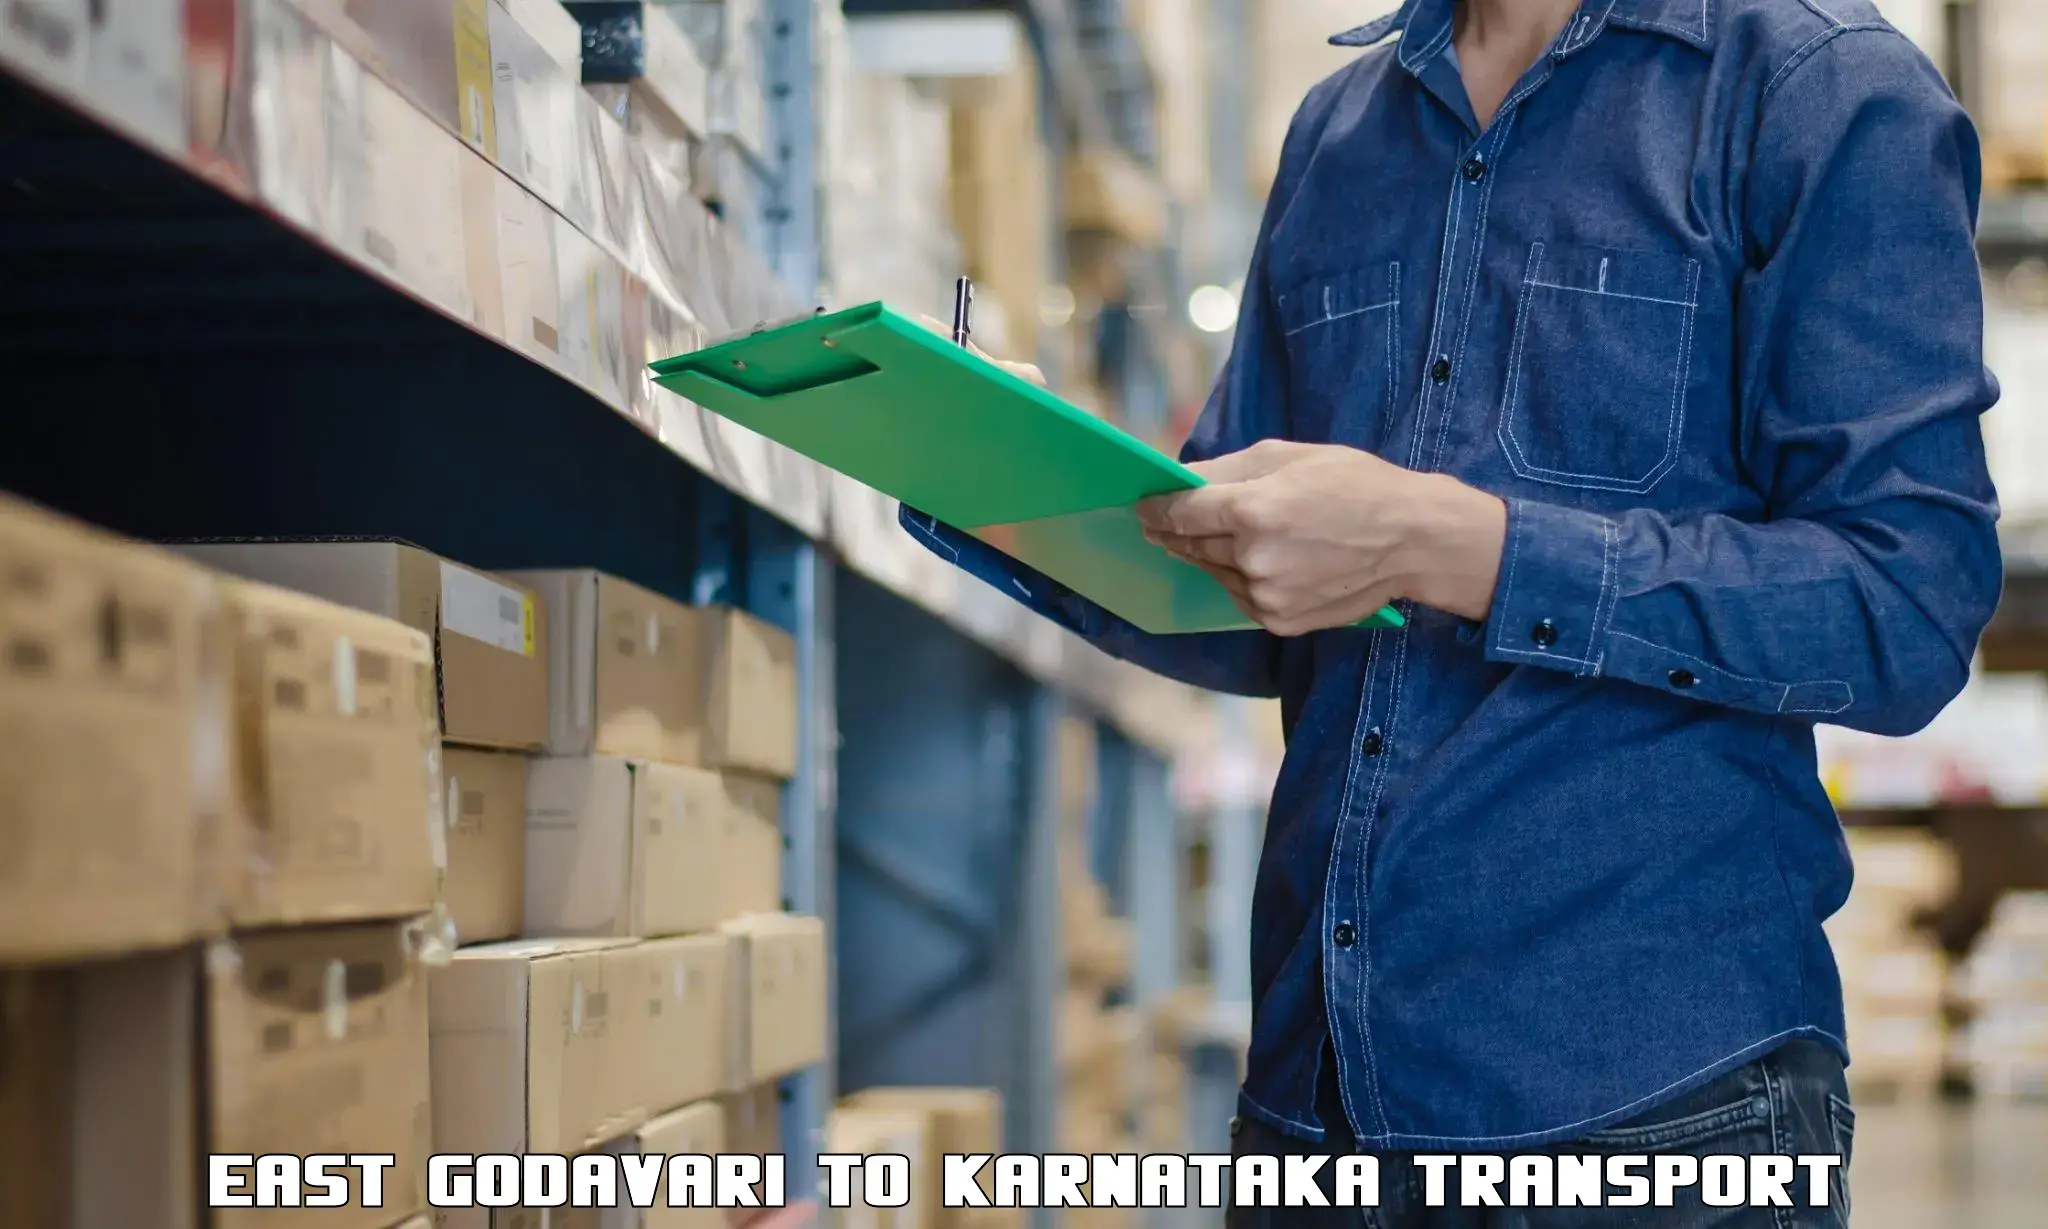 Container transport service East Godavari to Gonikoppal